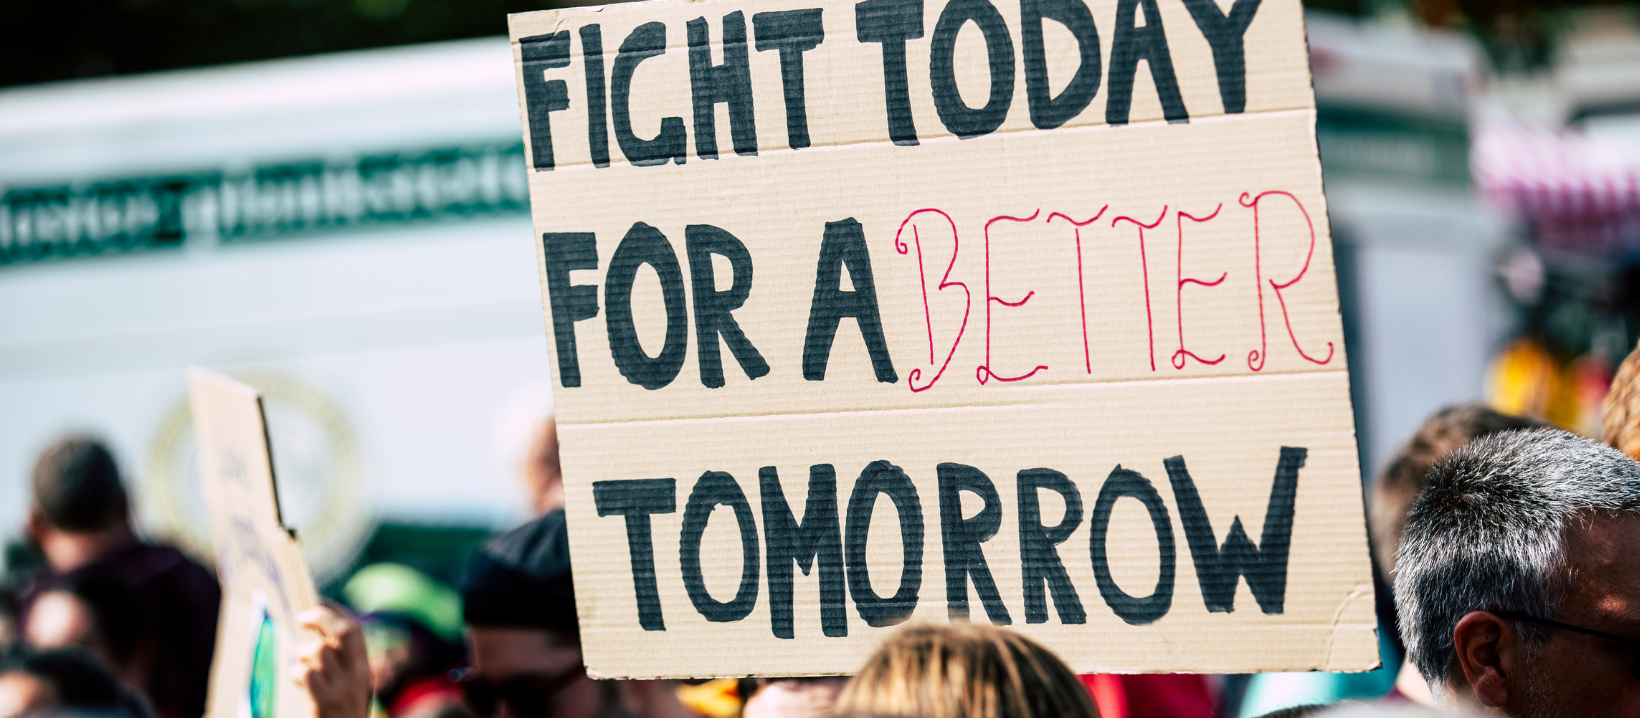 Rally with sign "Fight Today for a Better Tomorrow"